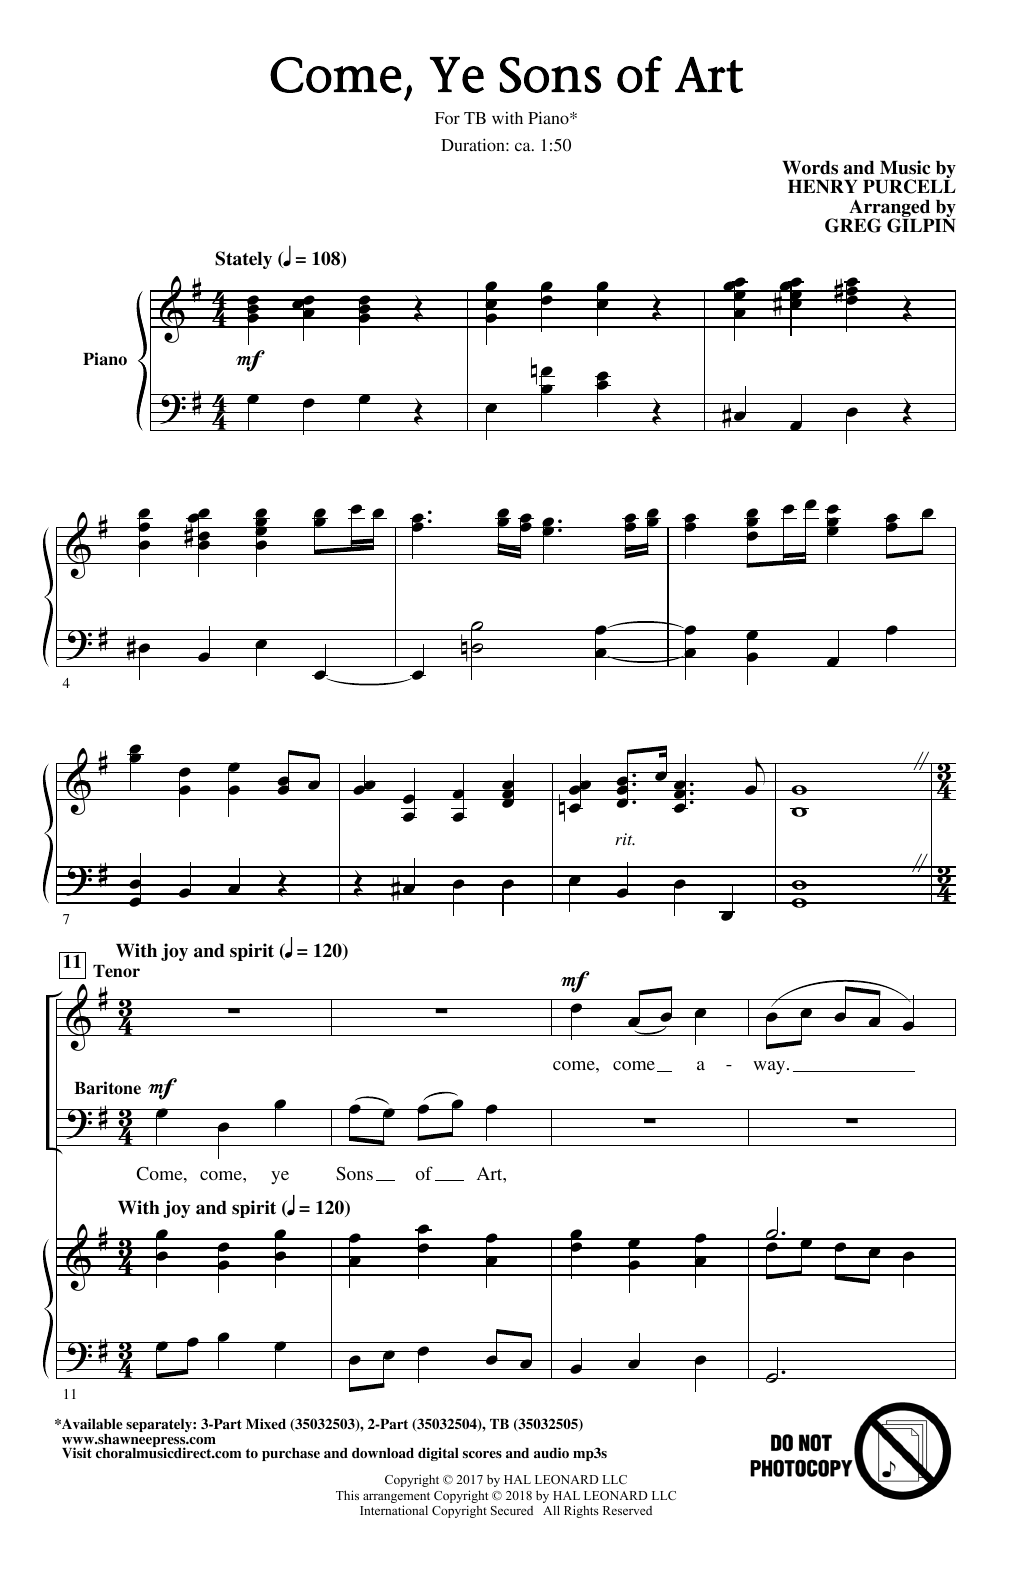 Download Henry Purcell Come, Ye Sons Of Art (arr. Greg Gilpin) Sheet Music